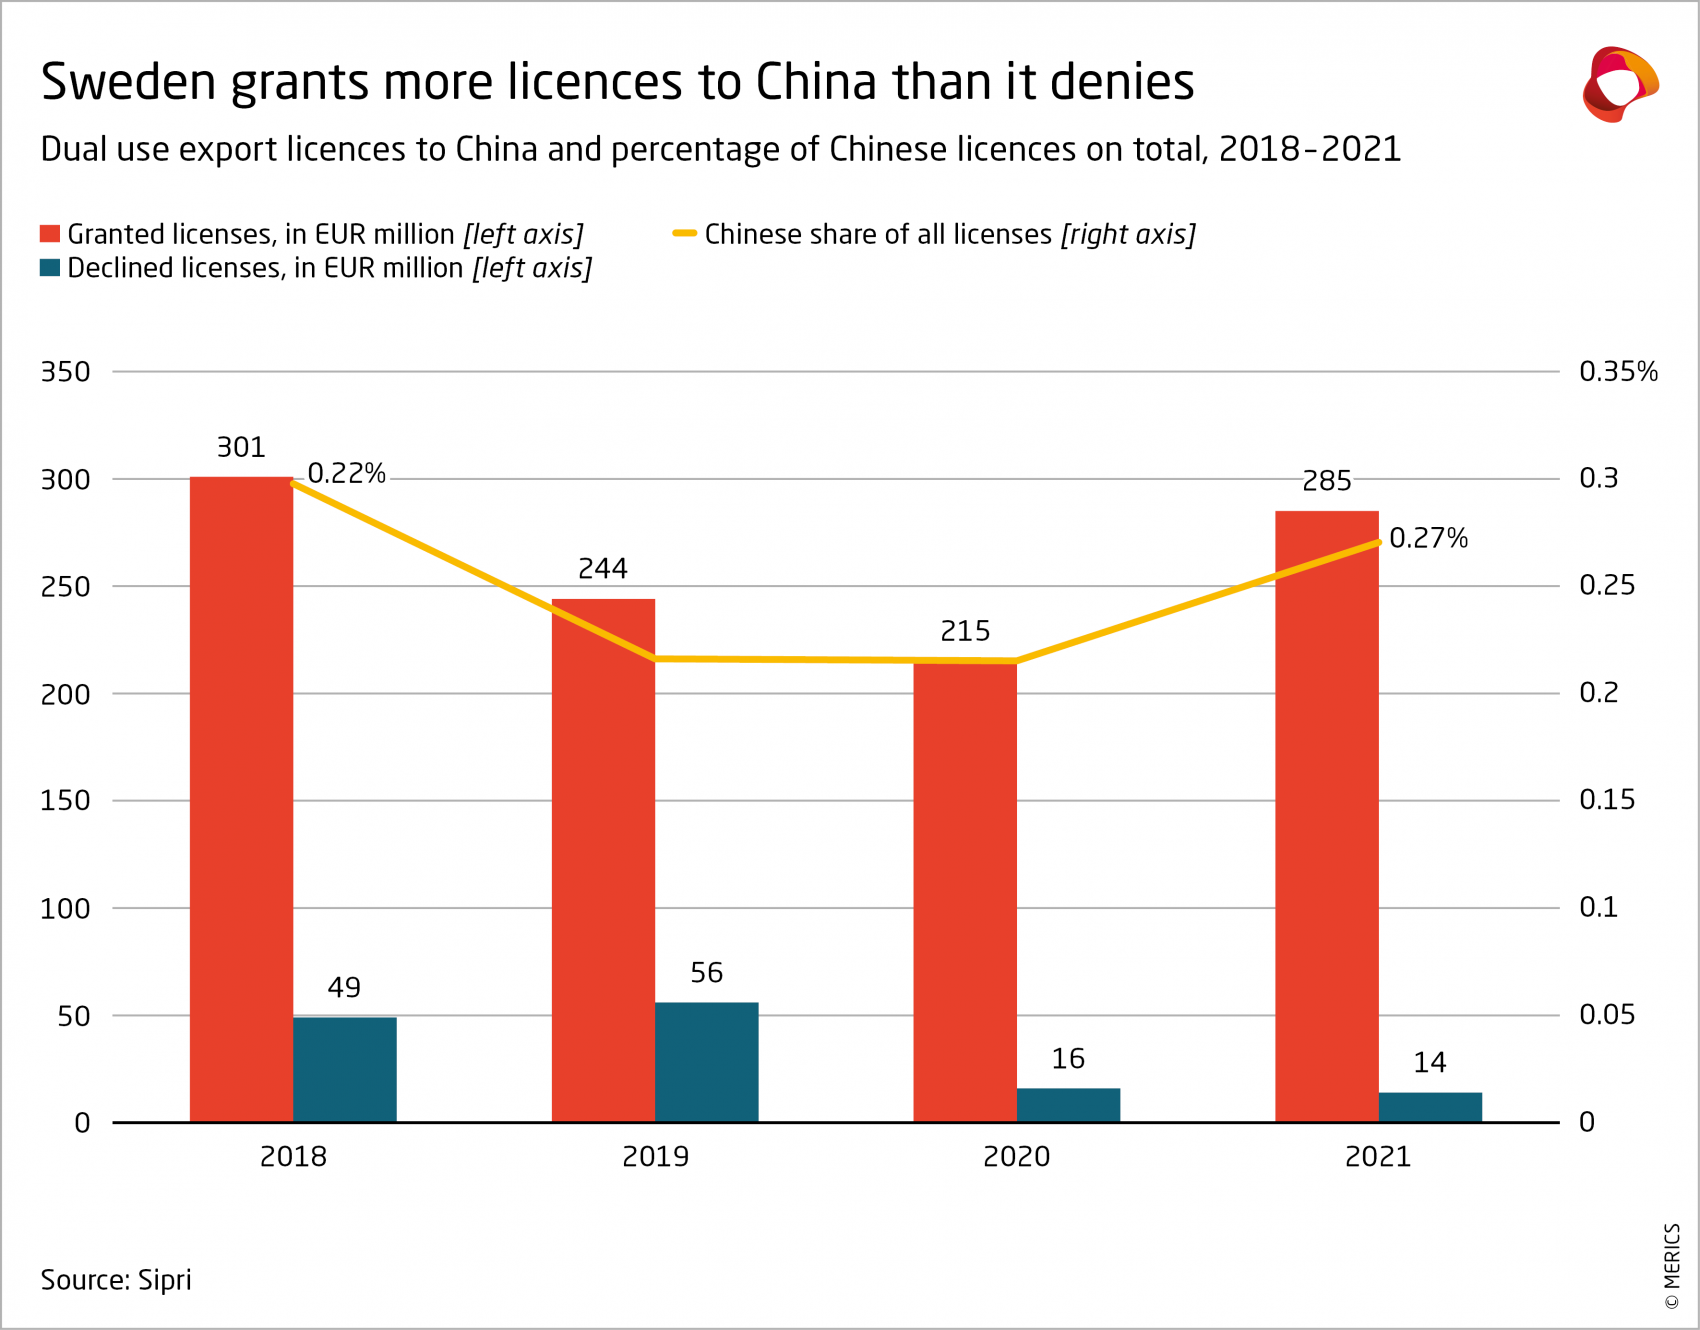 Dual use export licences to China, 2018-2021